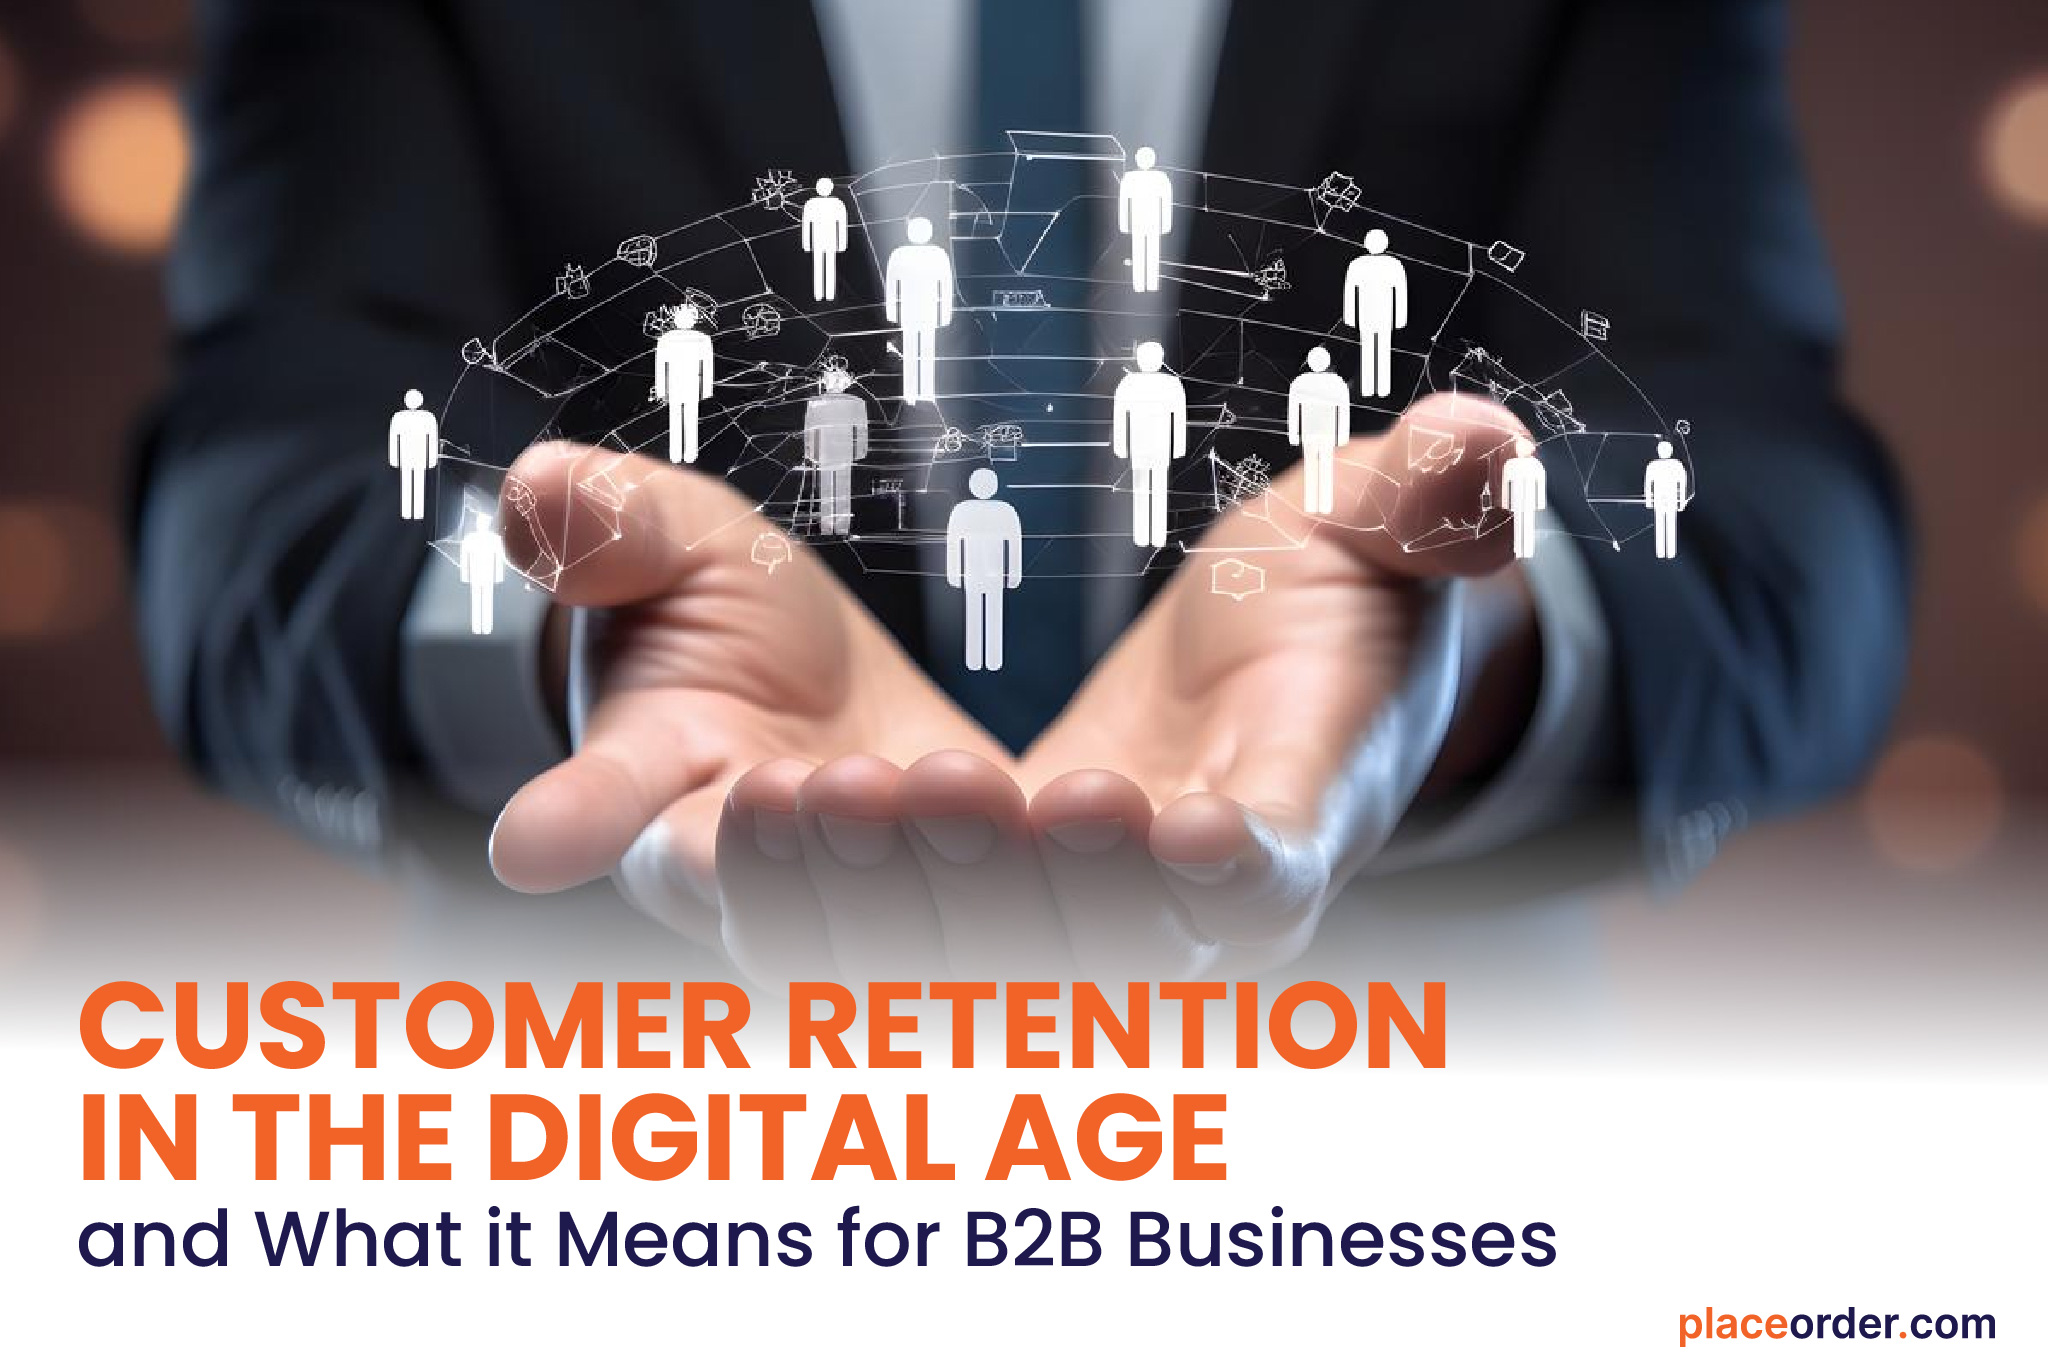 Customer Retention in the Digital Age and What it Means for B2B Businesses